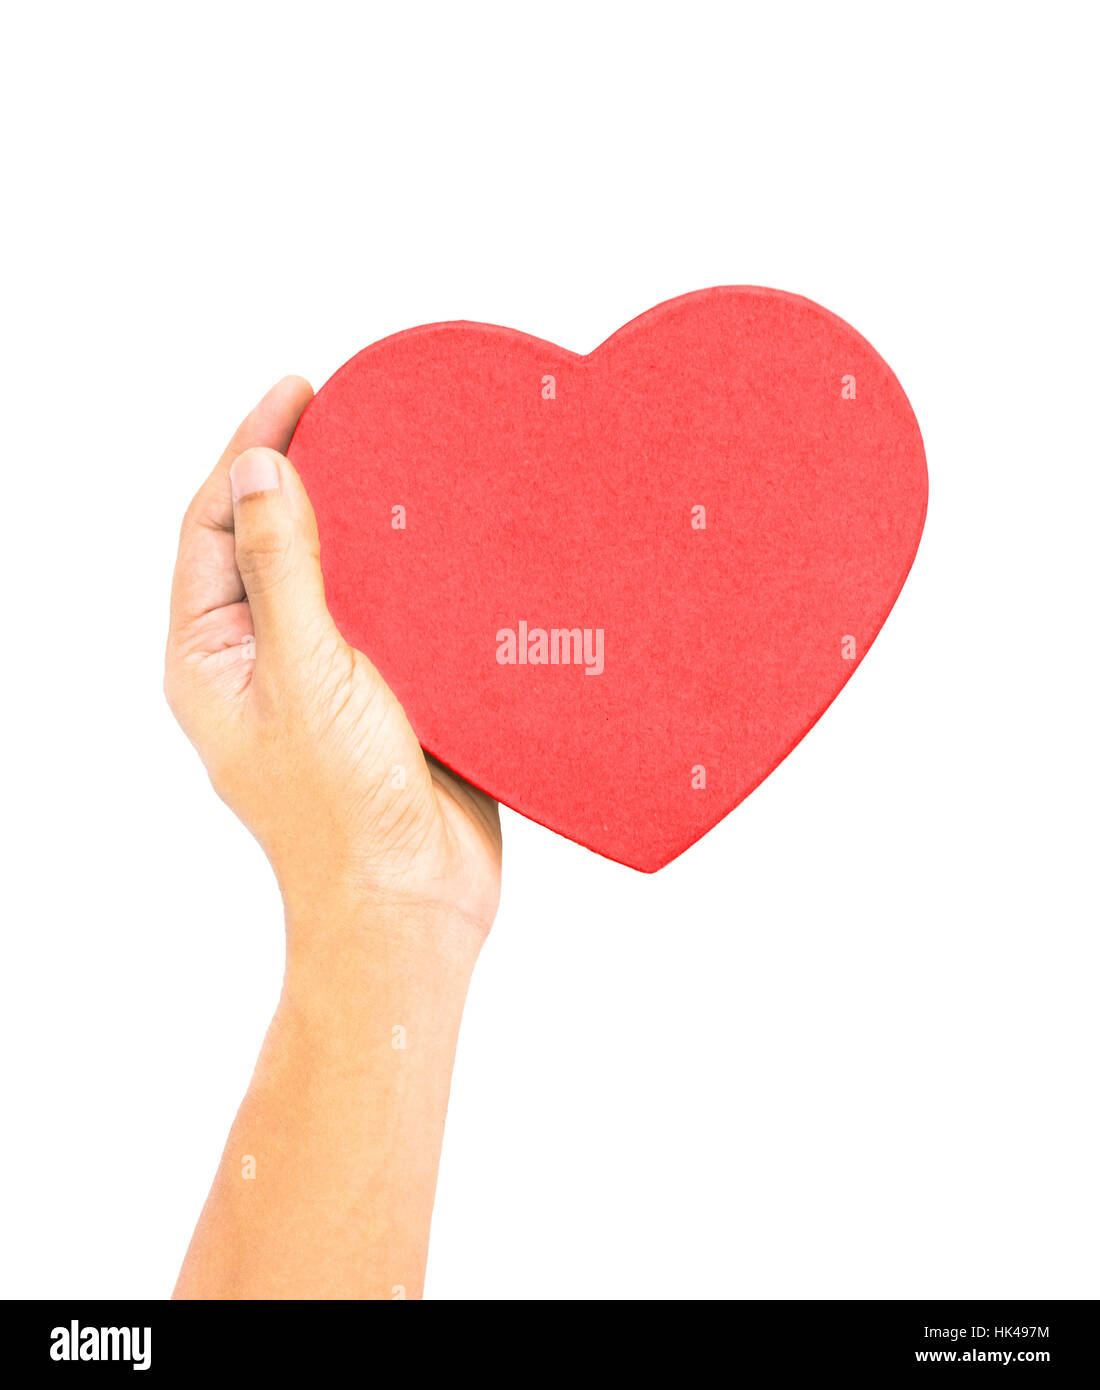 One hand holding red heart shaped box lid, love, care, healthcare, medical care, heart disease protection metaphor concept isolation on white with cli Stock Photo